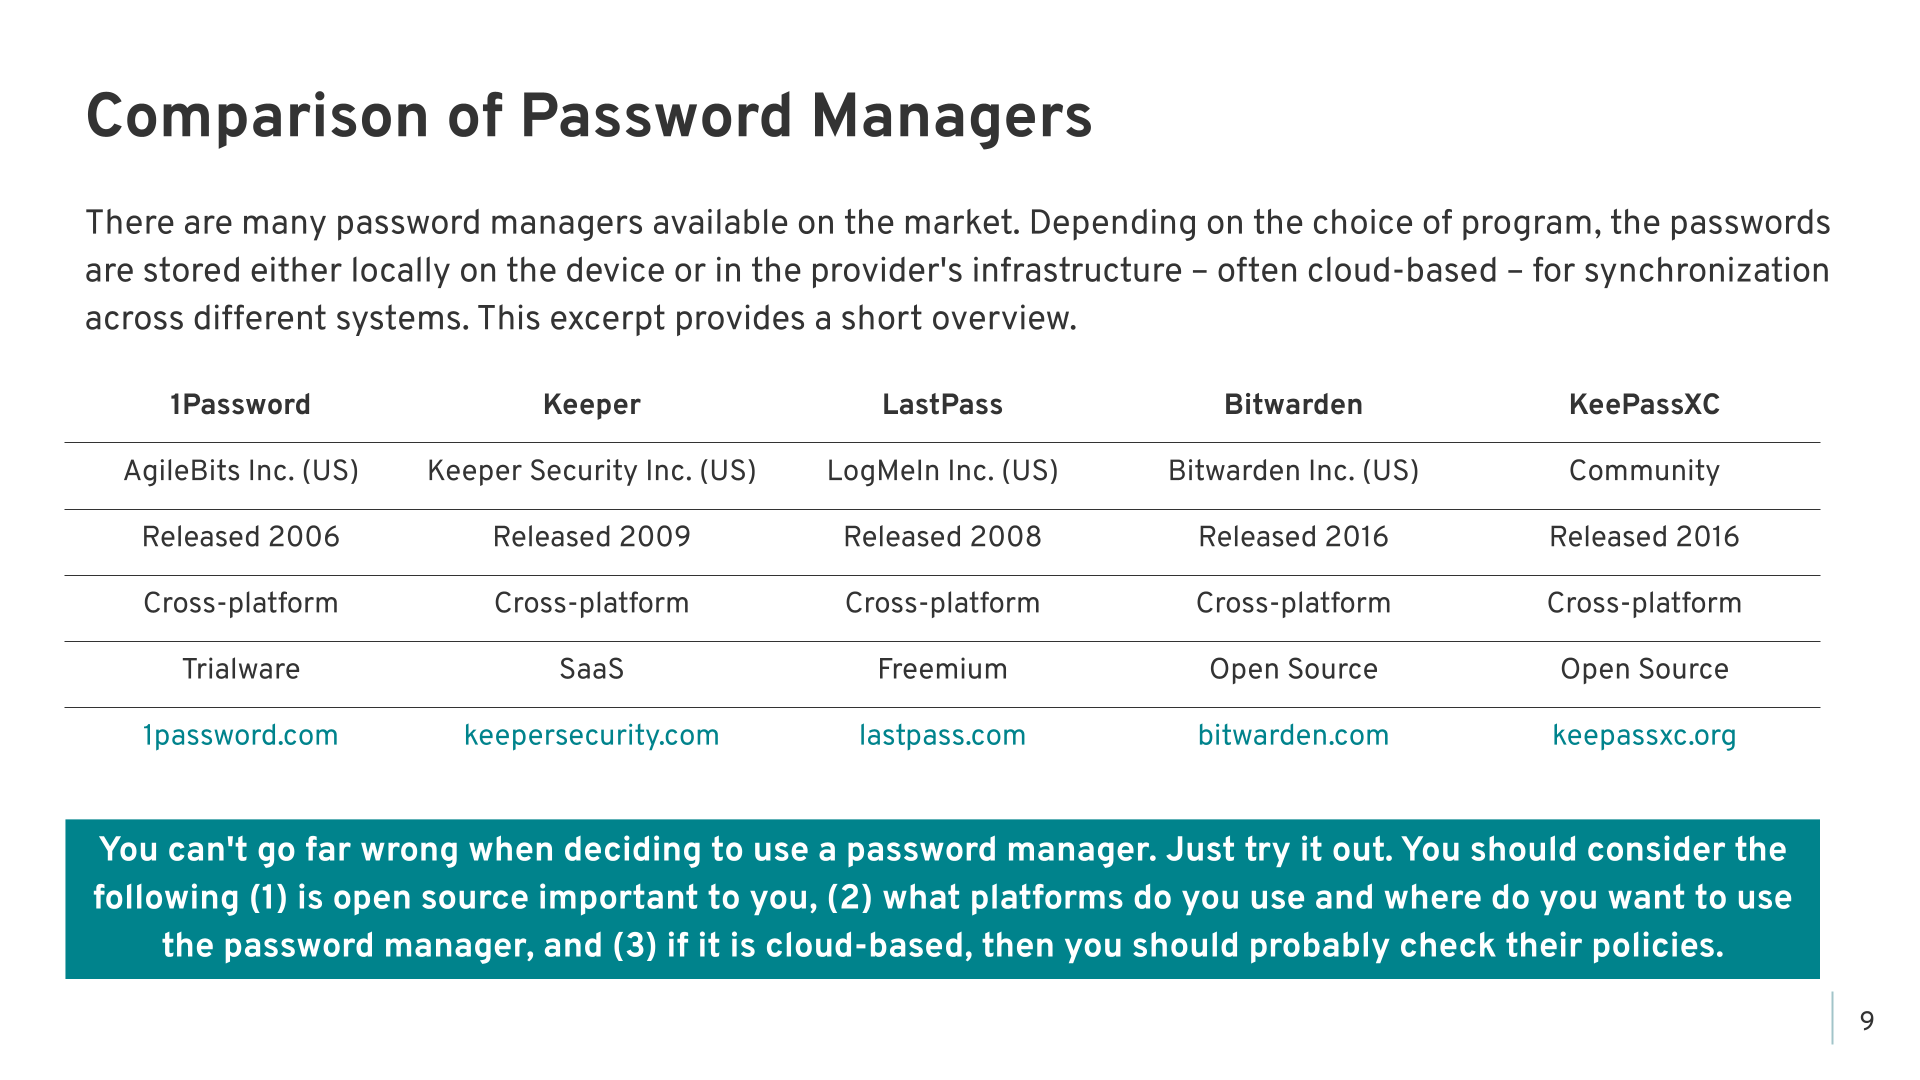 Passwords and Password Managers - Slide 9